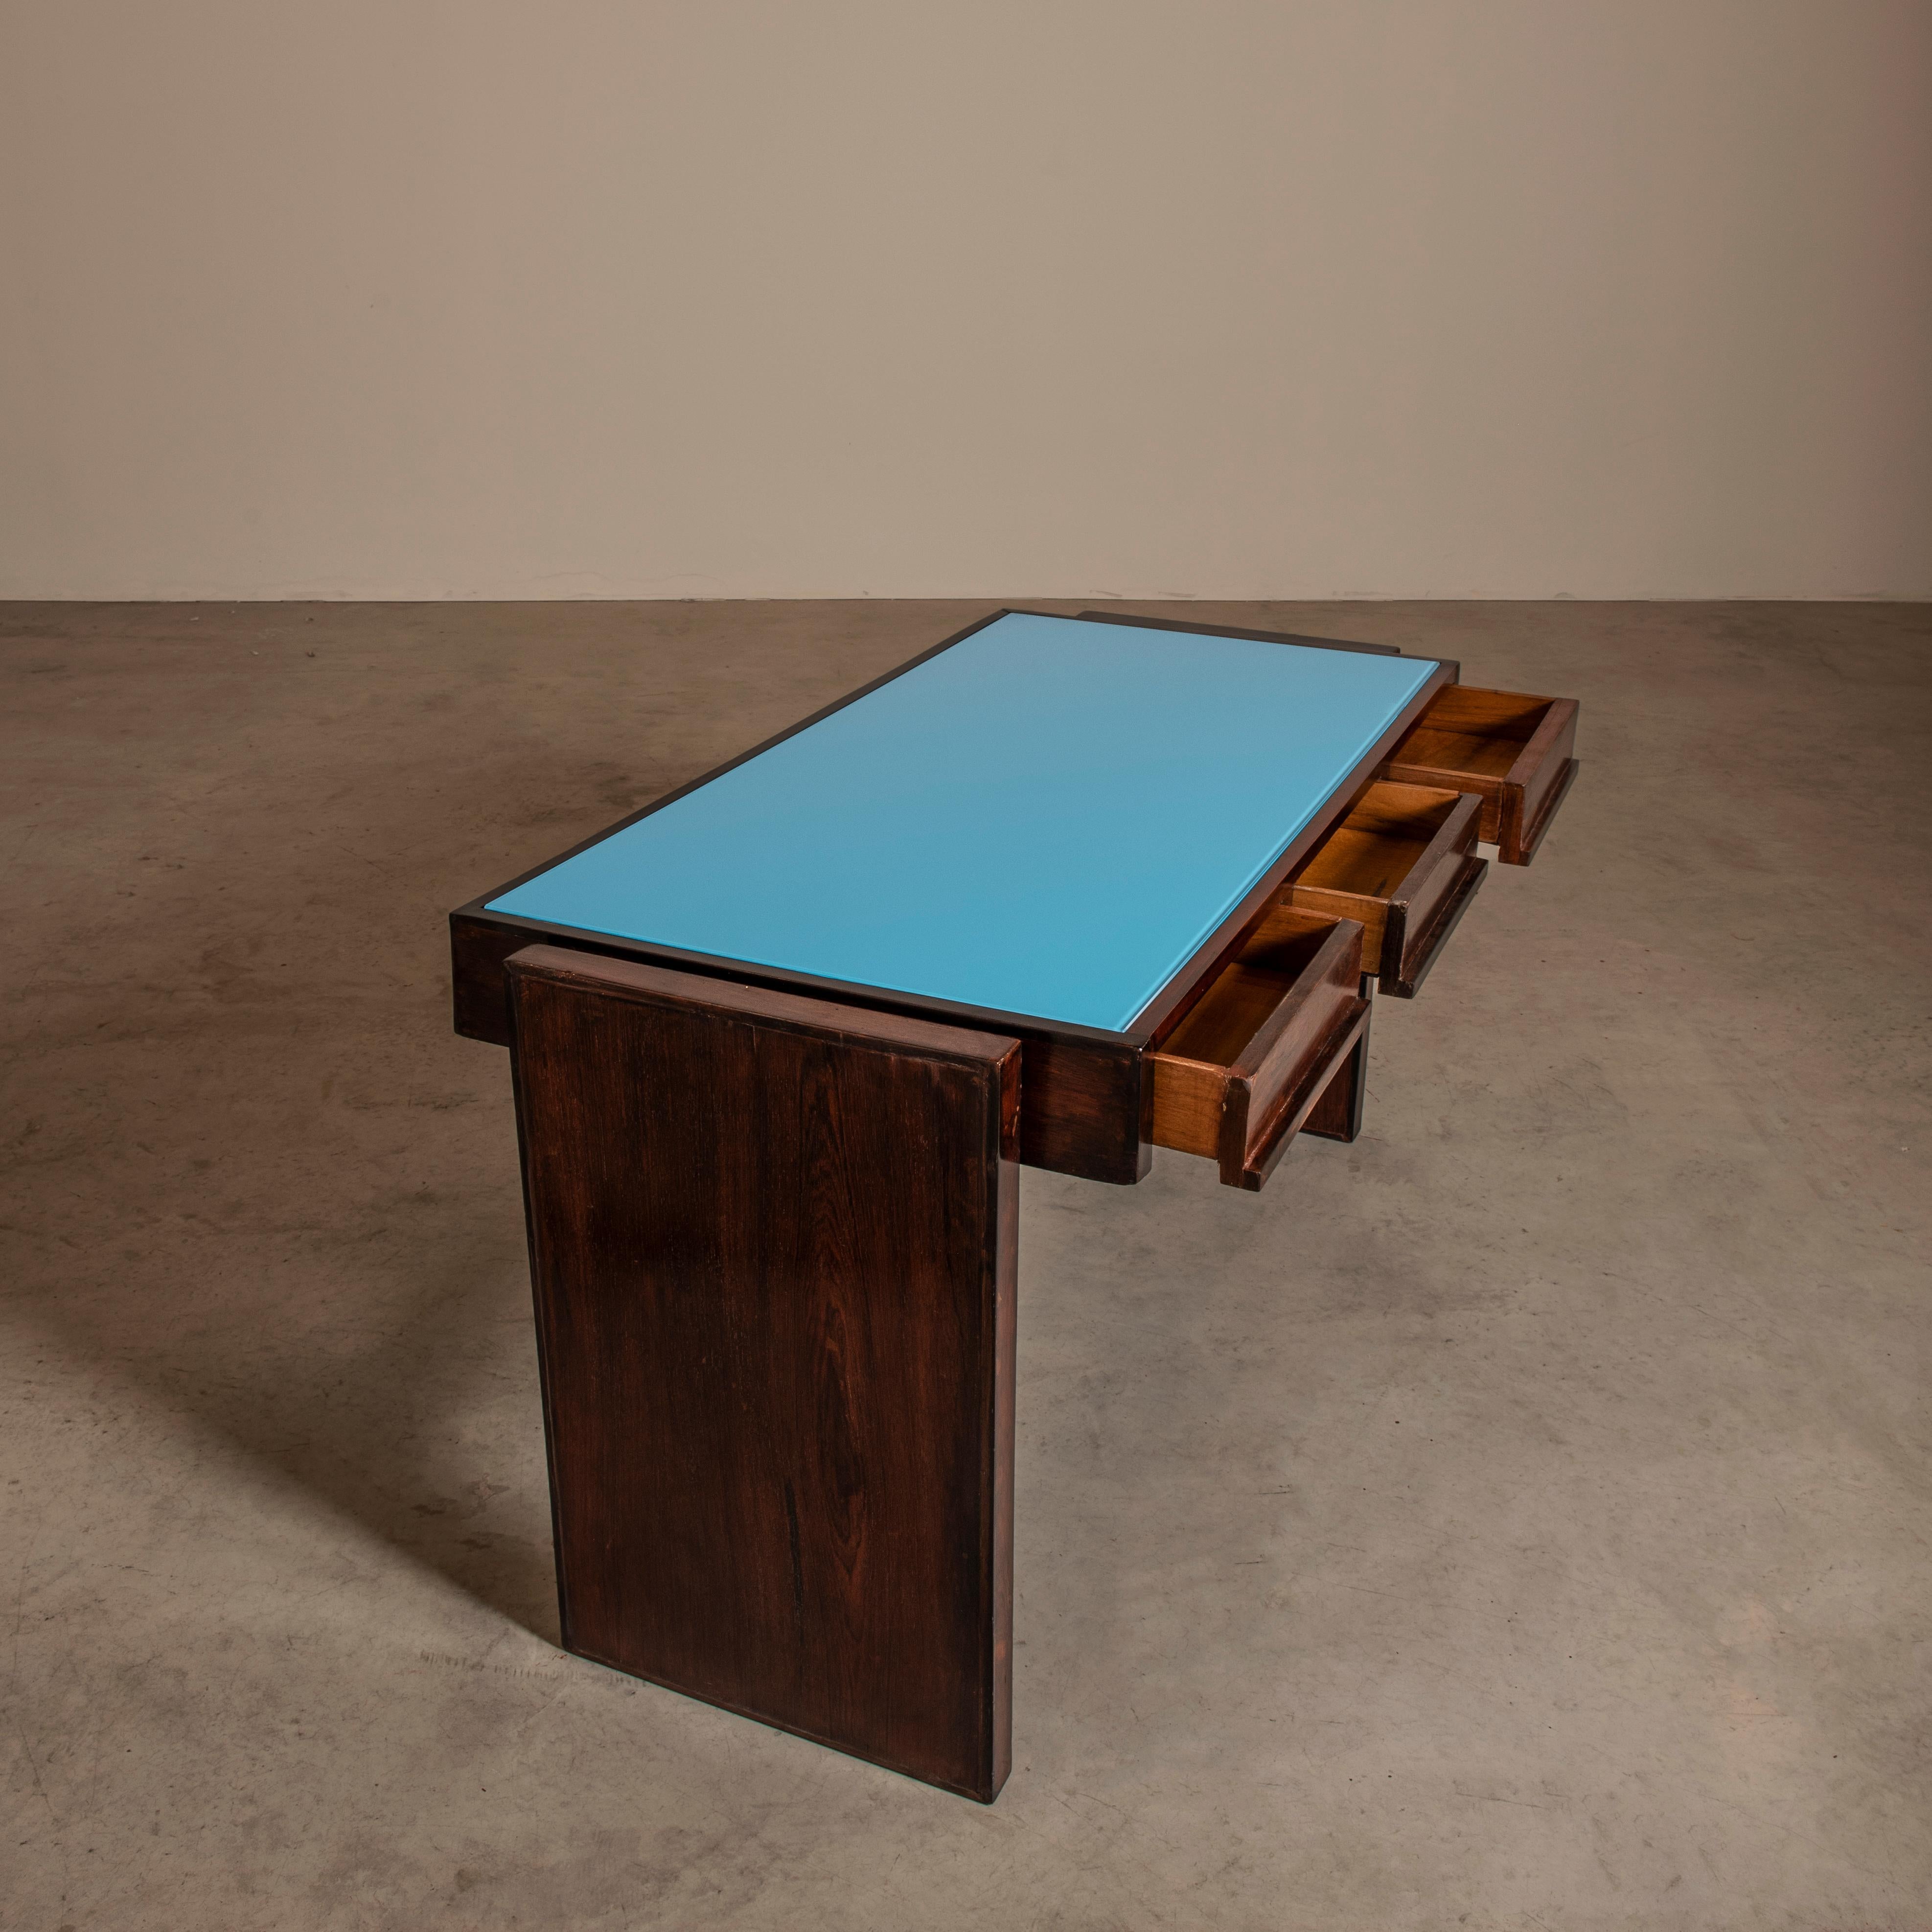 20th Century Desk with Painted Glass Top, Joaquim Tenreiro for Bloch Editors, Mid-Century